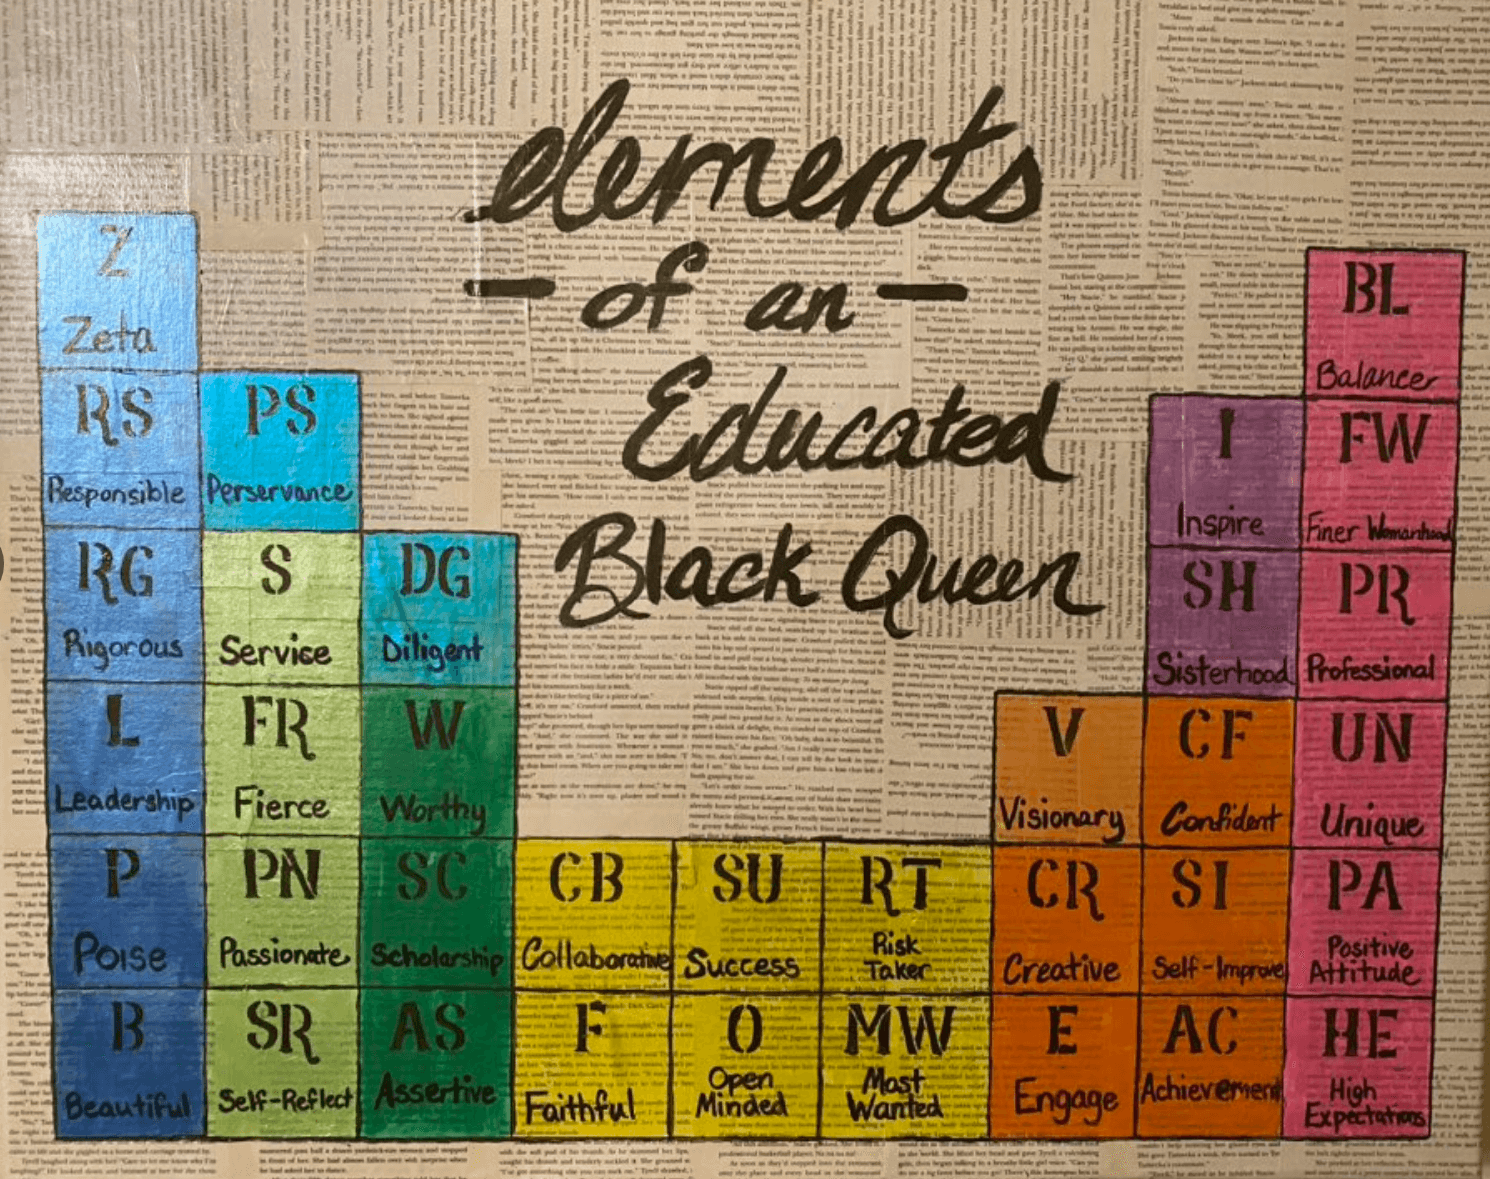 Elements of an Educated Black Queen